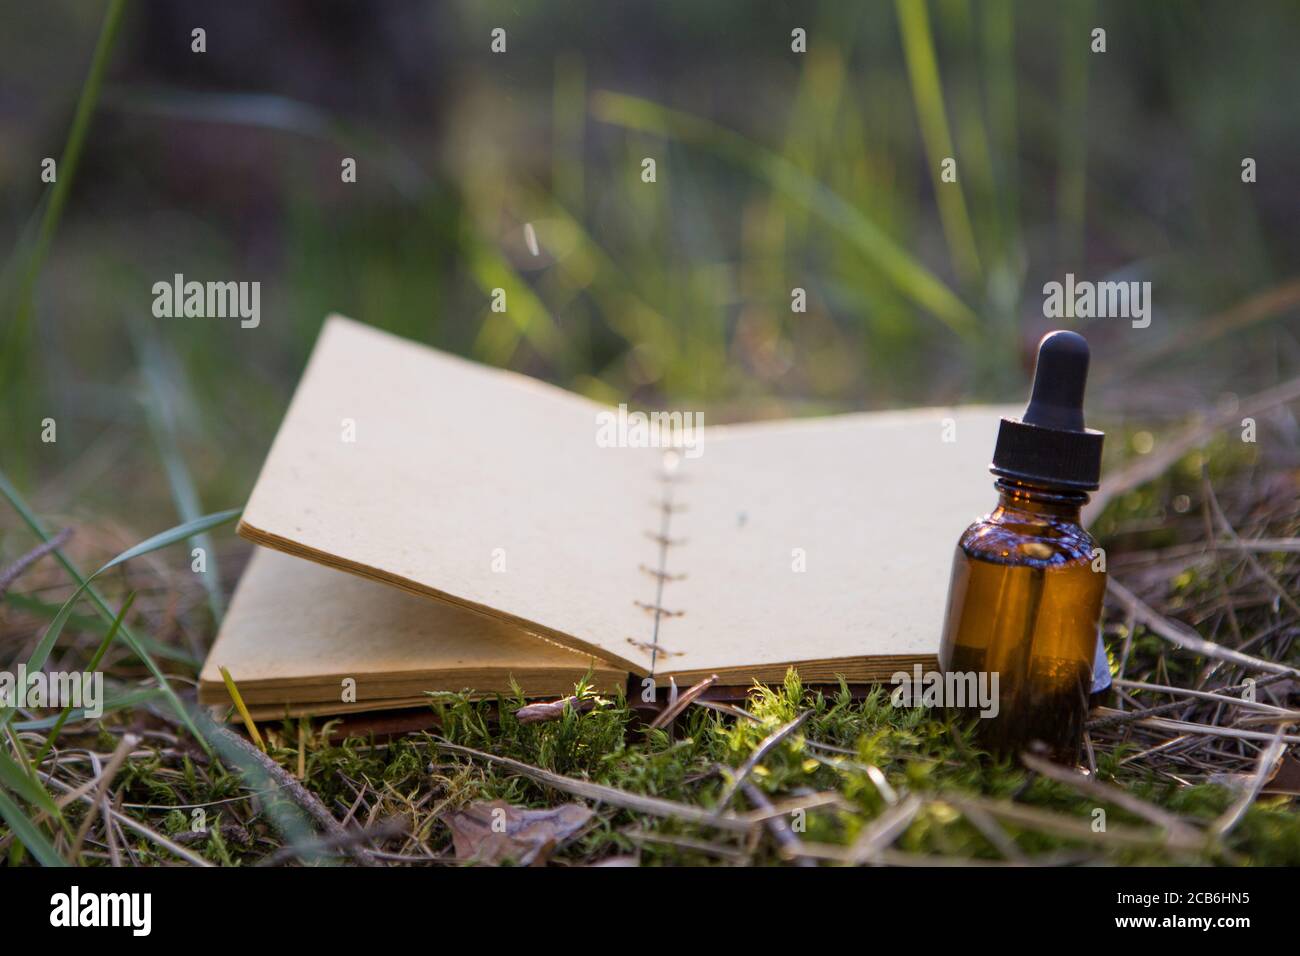 Vintage still life with open book, healing herbs. Stock Photo